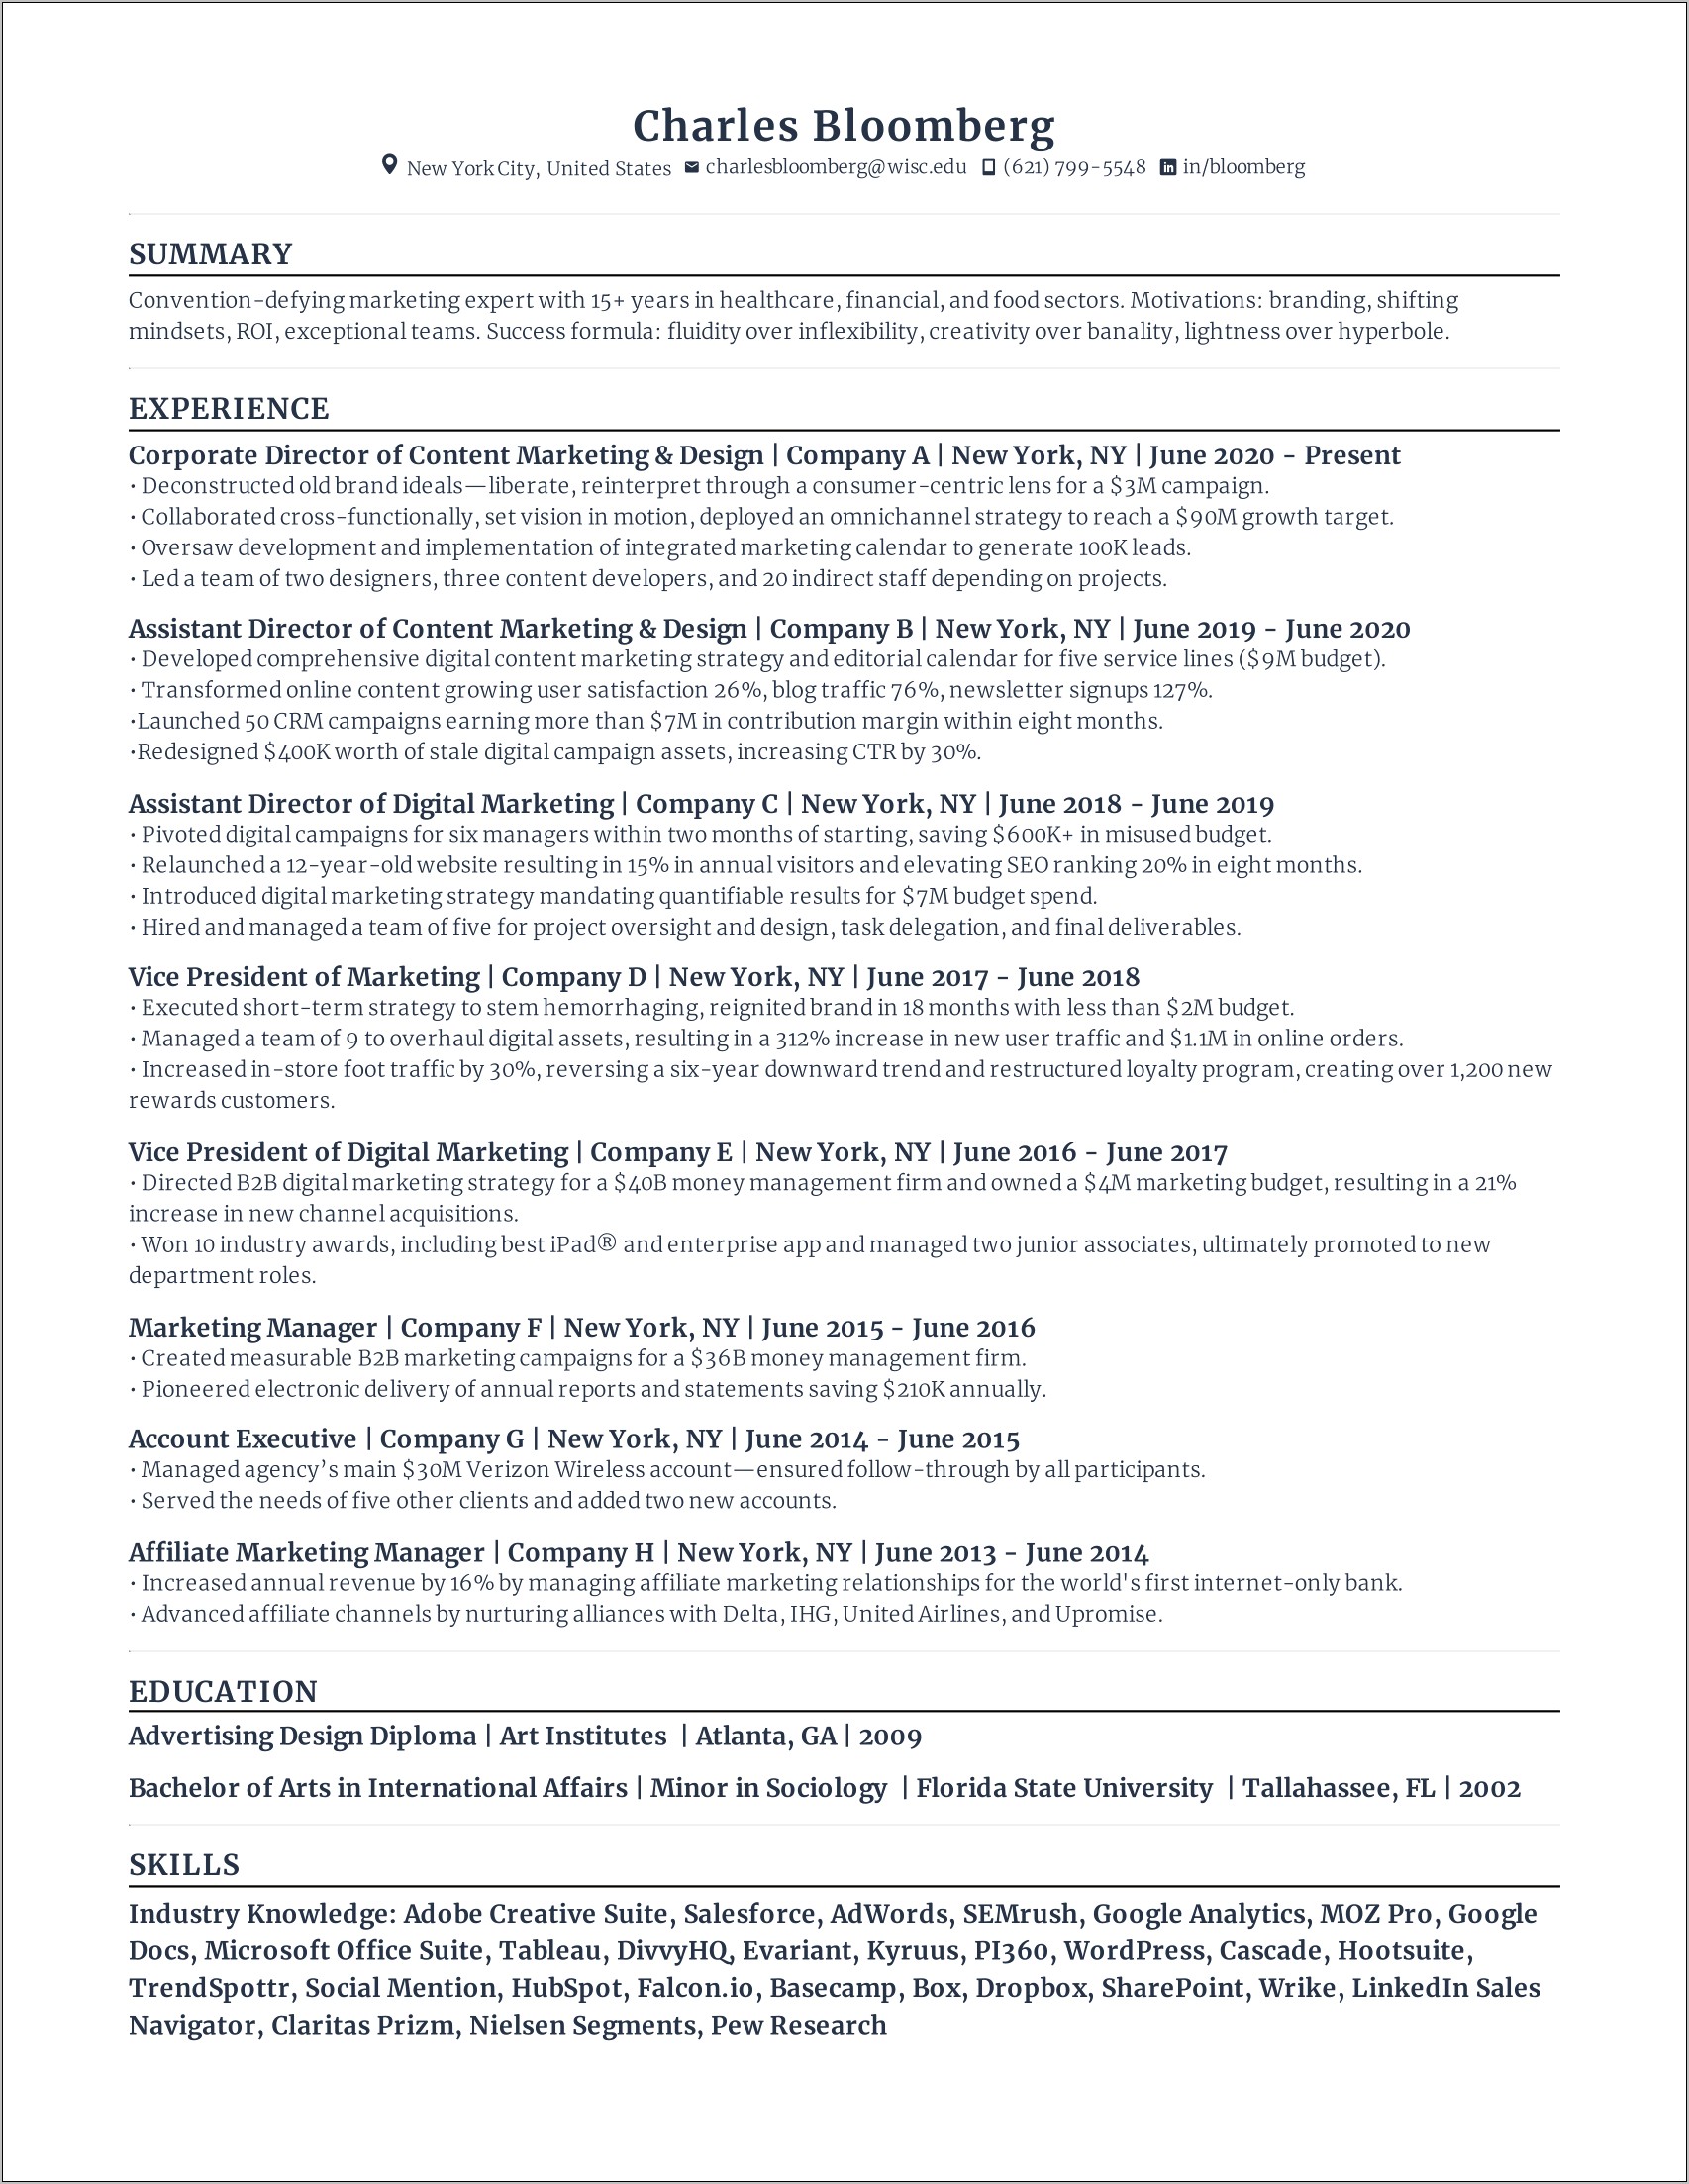 Resumes And Ats Years Of Experience